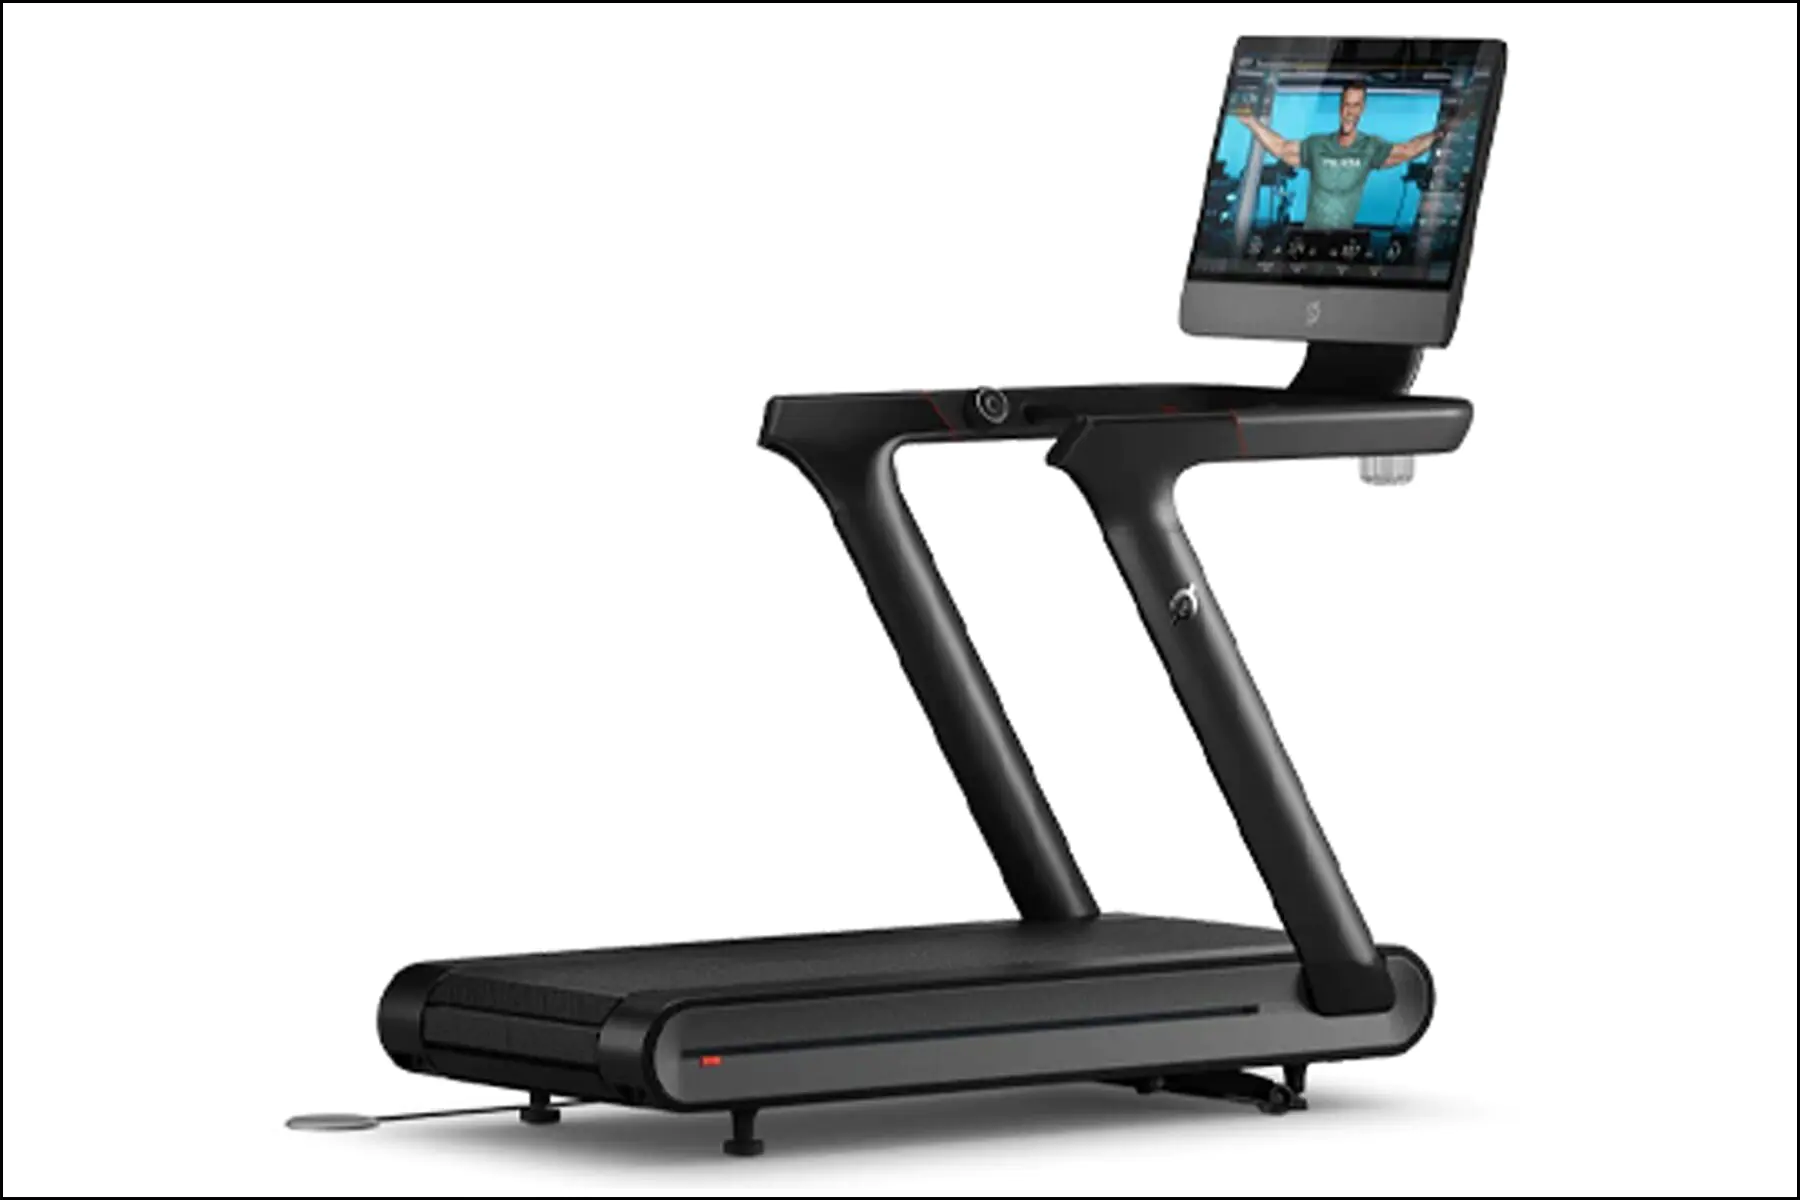 CPSC Warns Against Utilizing Peloton Treadmill After Cramped one’s Demise